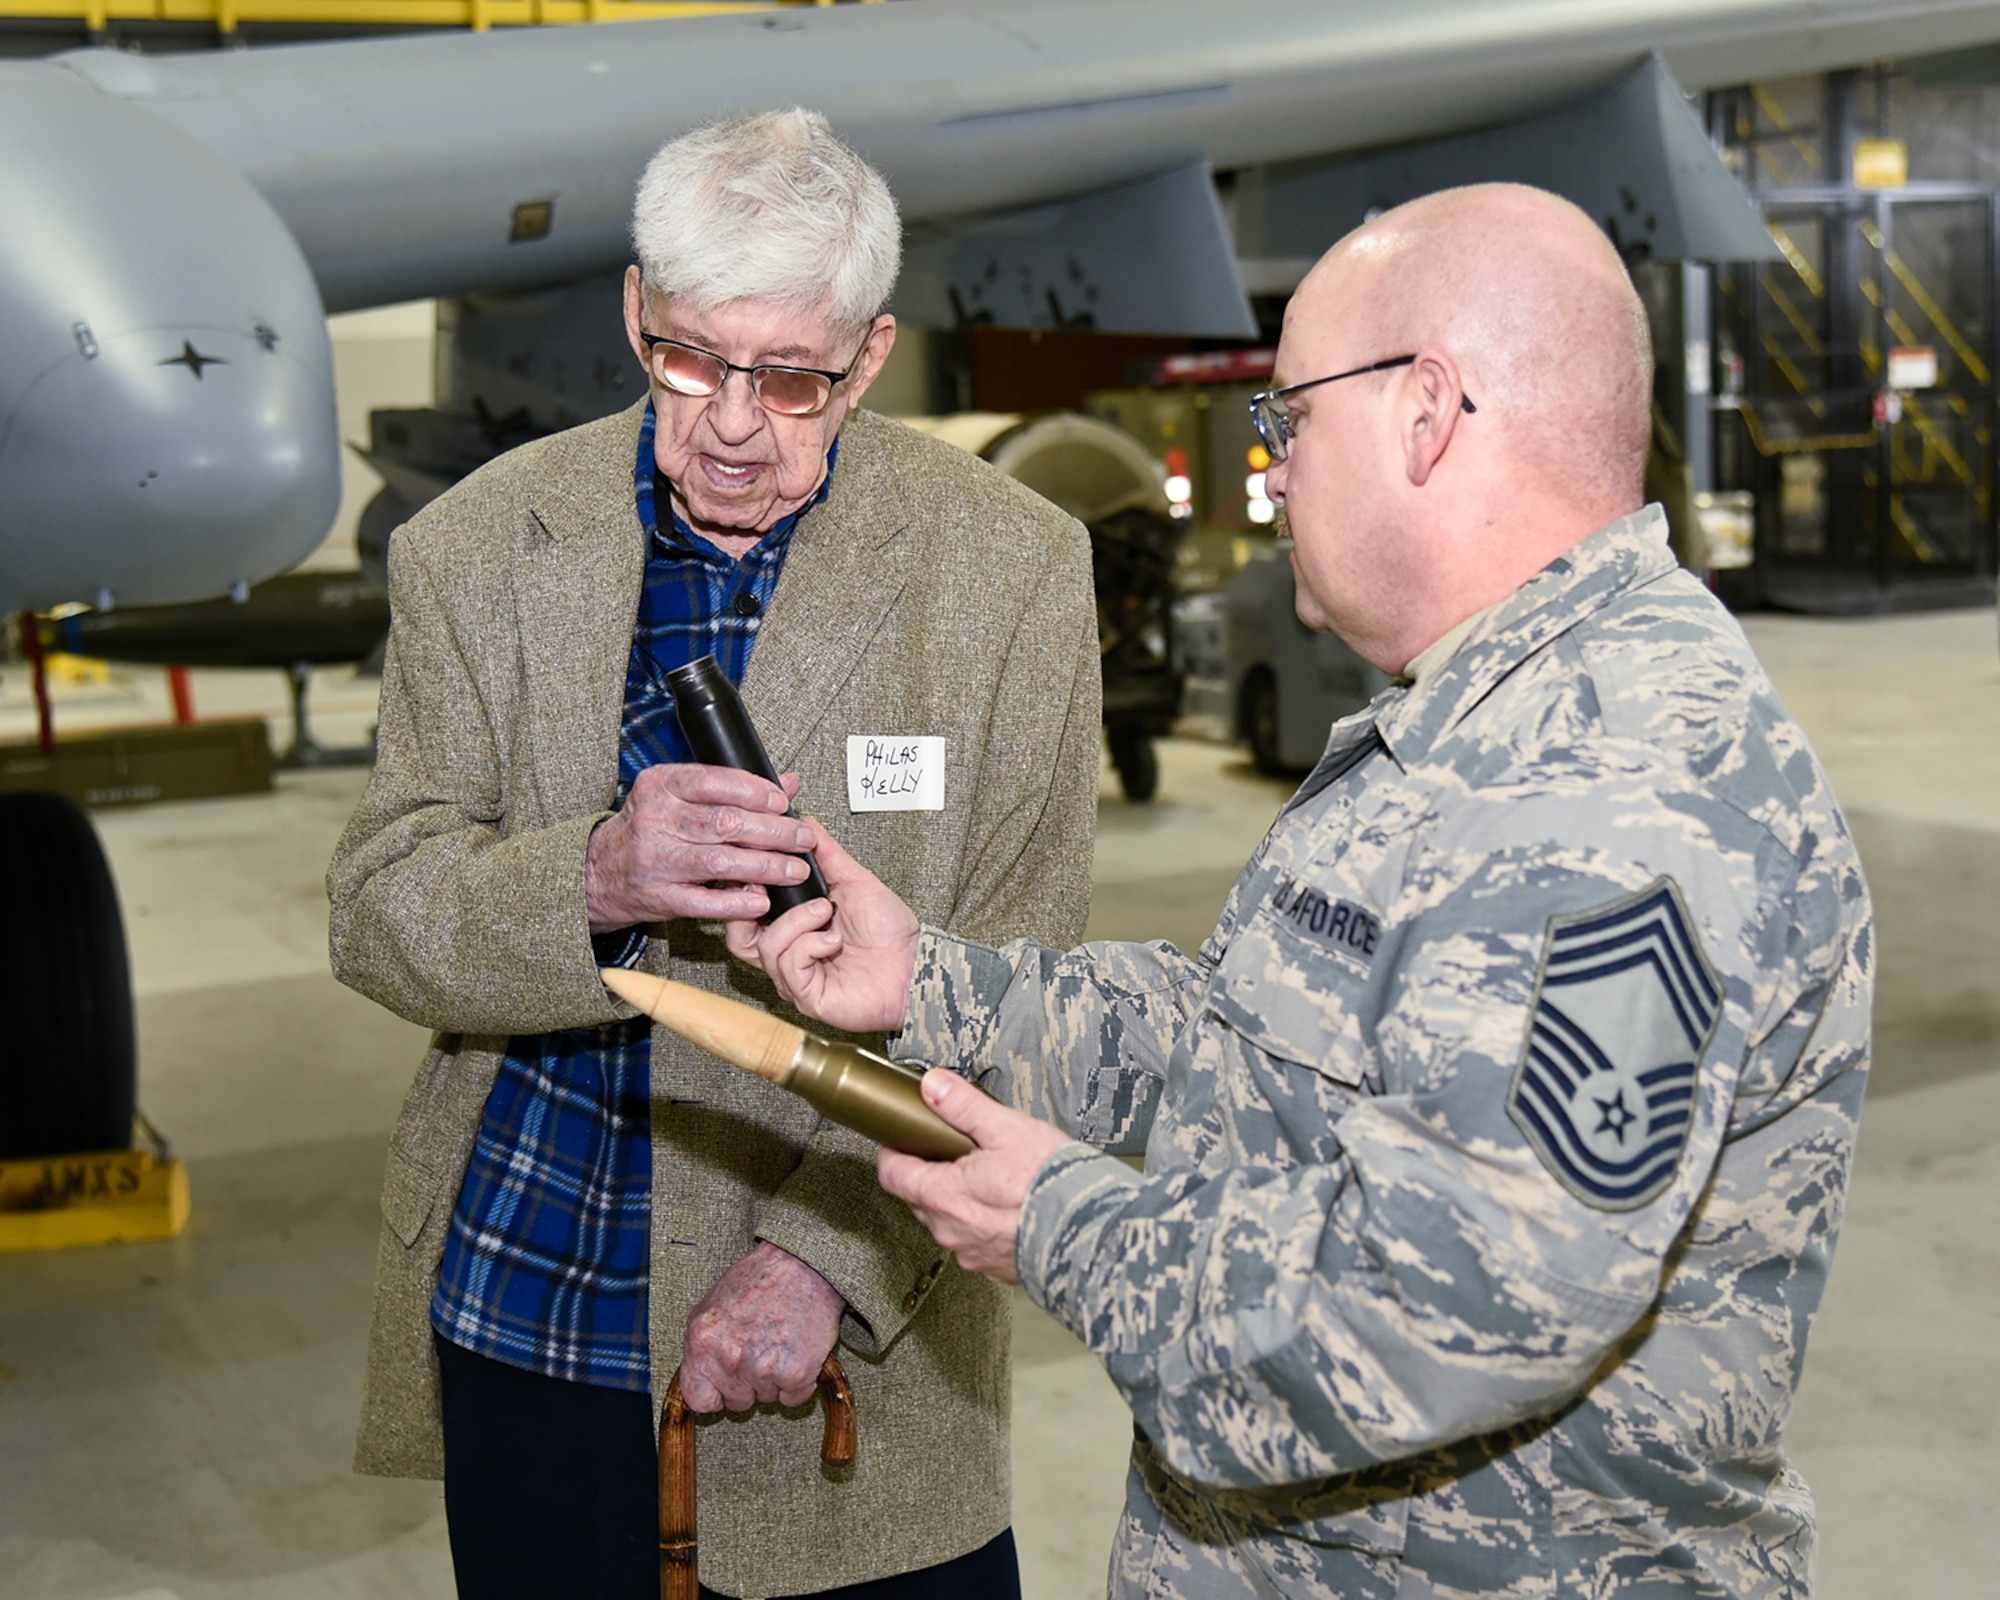 Chief Master Sgt. David Myers of the 127th Aircraft Maintenance Squadron shows a dummy 30mm round to Philas Kelly, who, at age 102, is likely the oldest living member of the 107th Observation Squadron of the Michigan National Guard. Myers and his team of maintenance Airmen support the current 107th Fighter Squadron, which flies the A-10 Thunderbolt II aircraft. Kelly visited his old unit at Selfridge Air National Guard Base, Mich., on March 15, 2016. (U.S. Air National Guard photo by Terry Atwell)